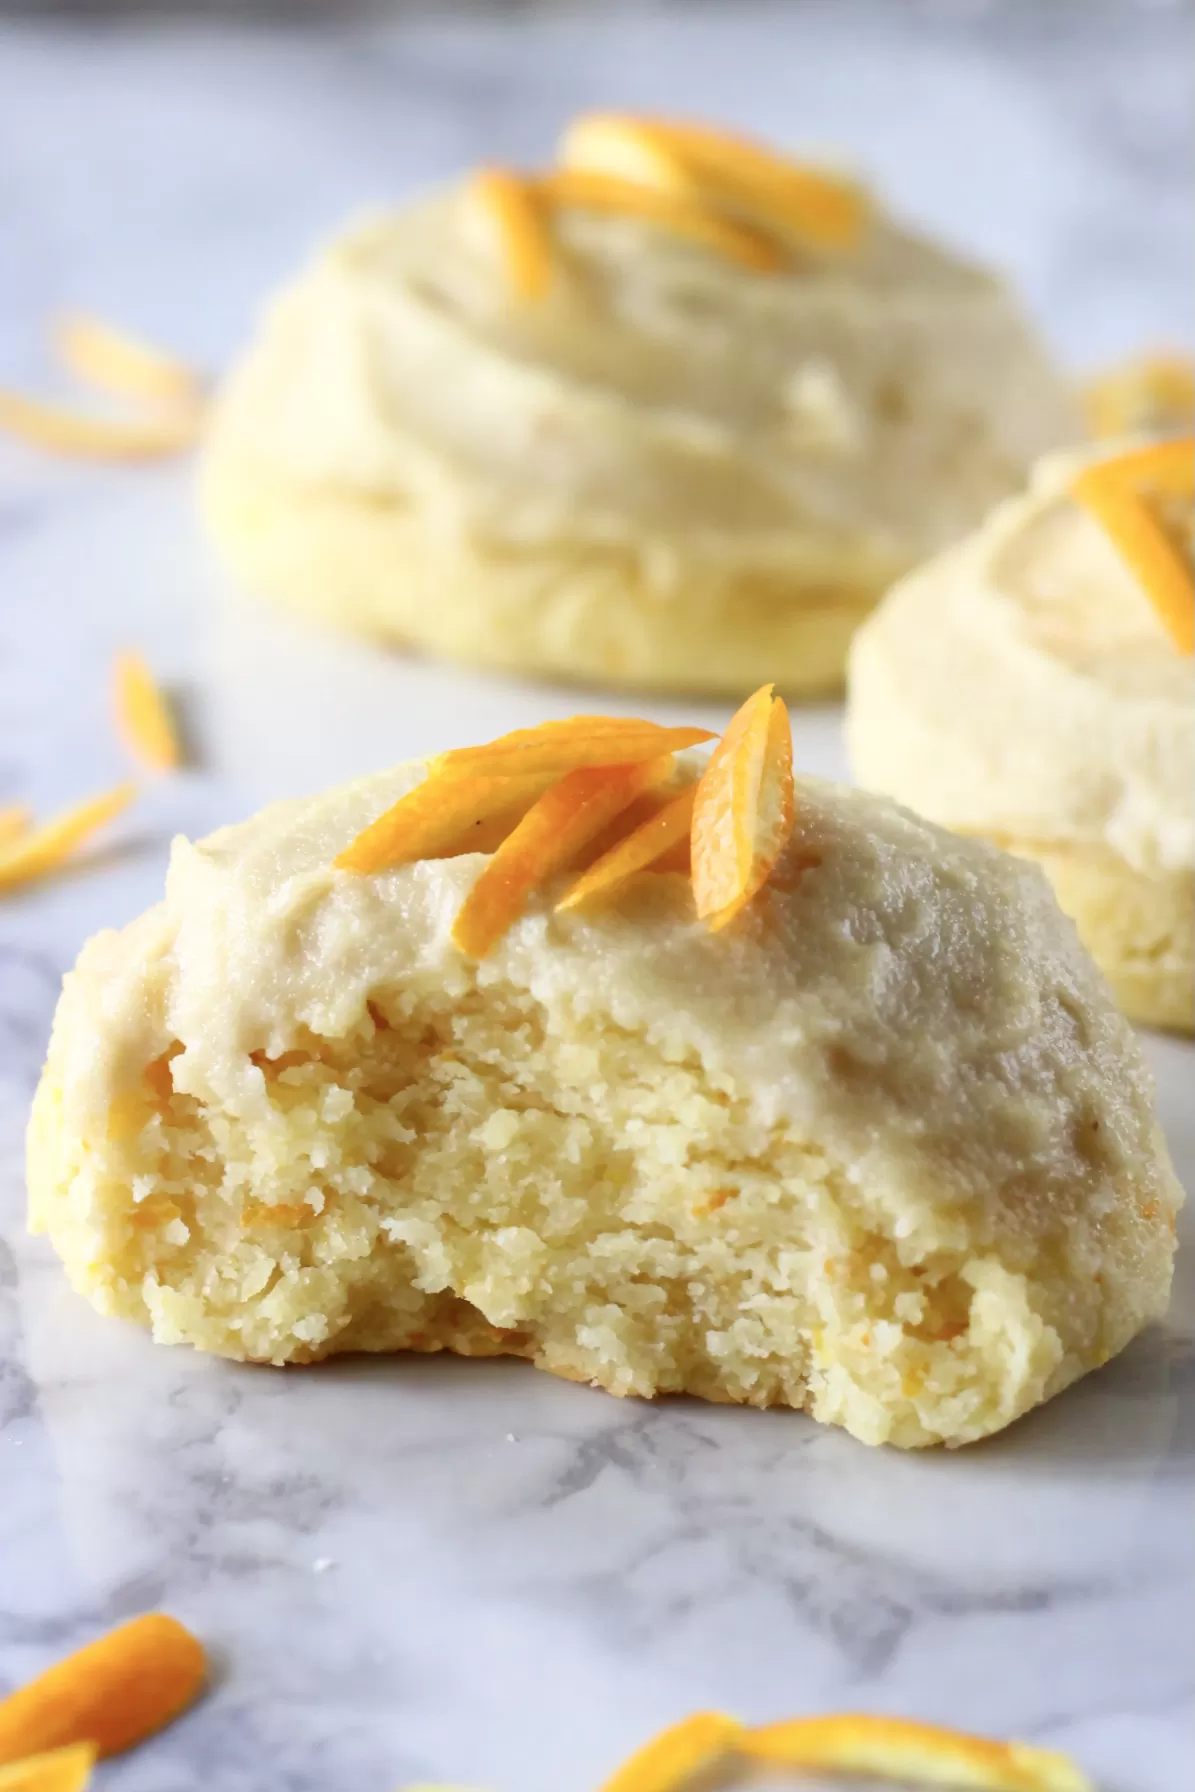 Three gluten-free vegan orange cookies with frosting and orange zest with a bite taken out of one